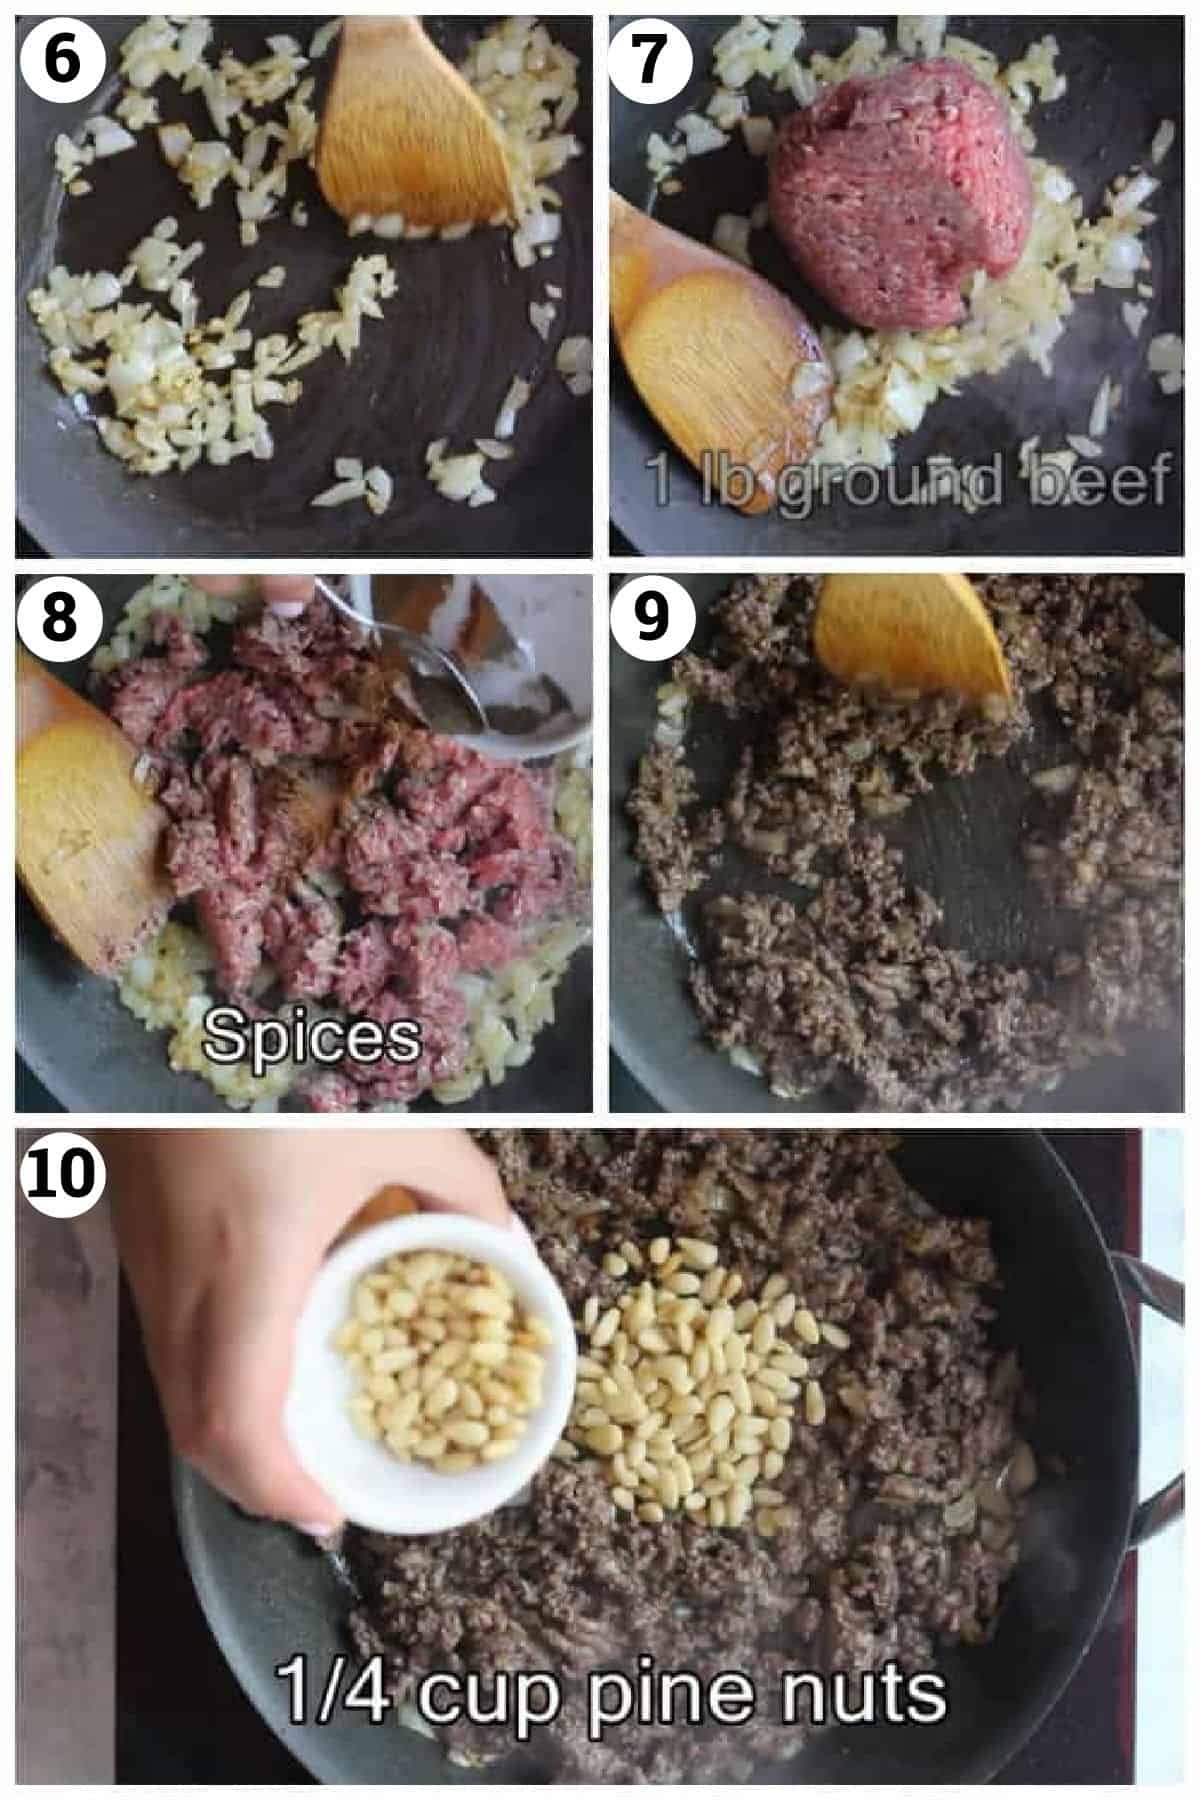 To make the filling, Fry the onions, add ground beef and spices and brown the beef. Add in pine nuts. 